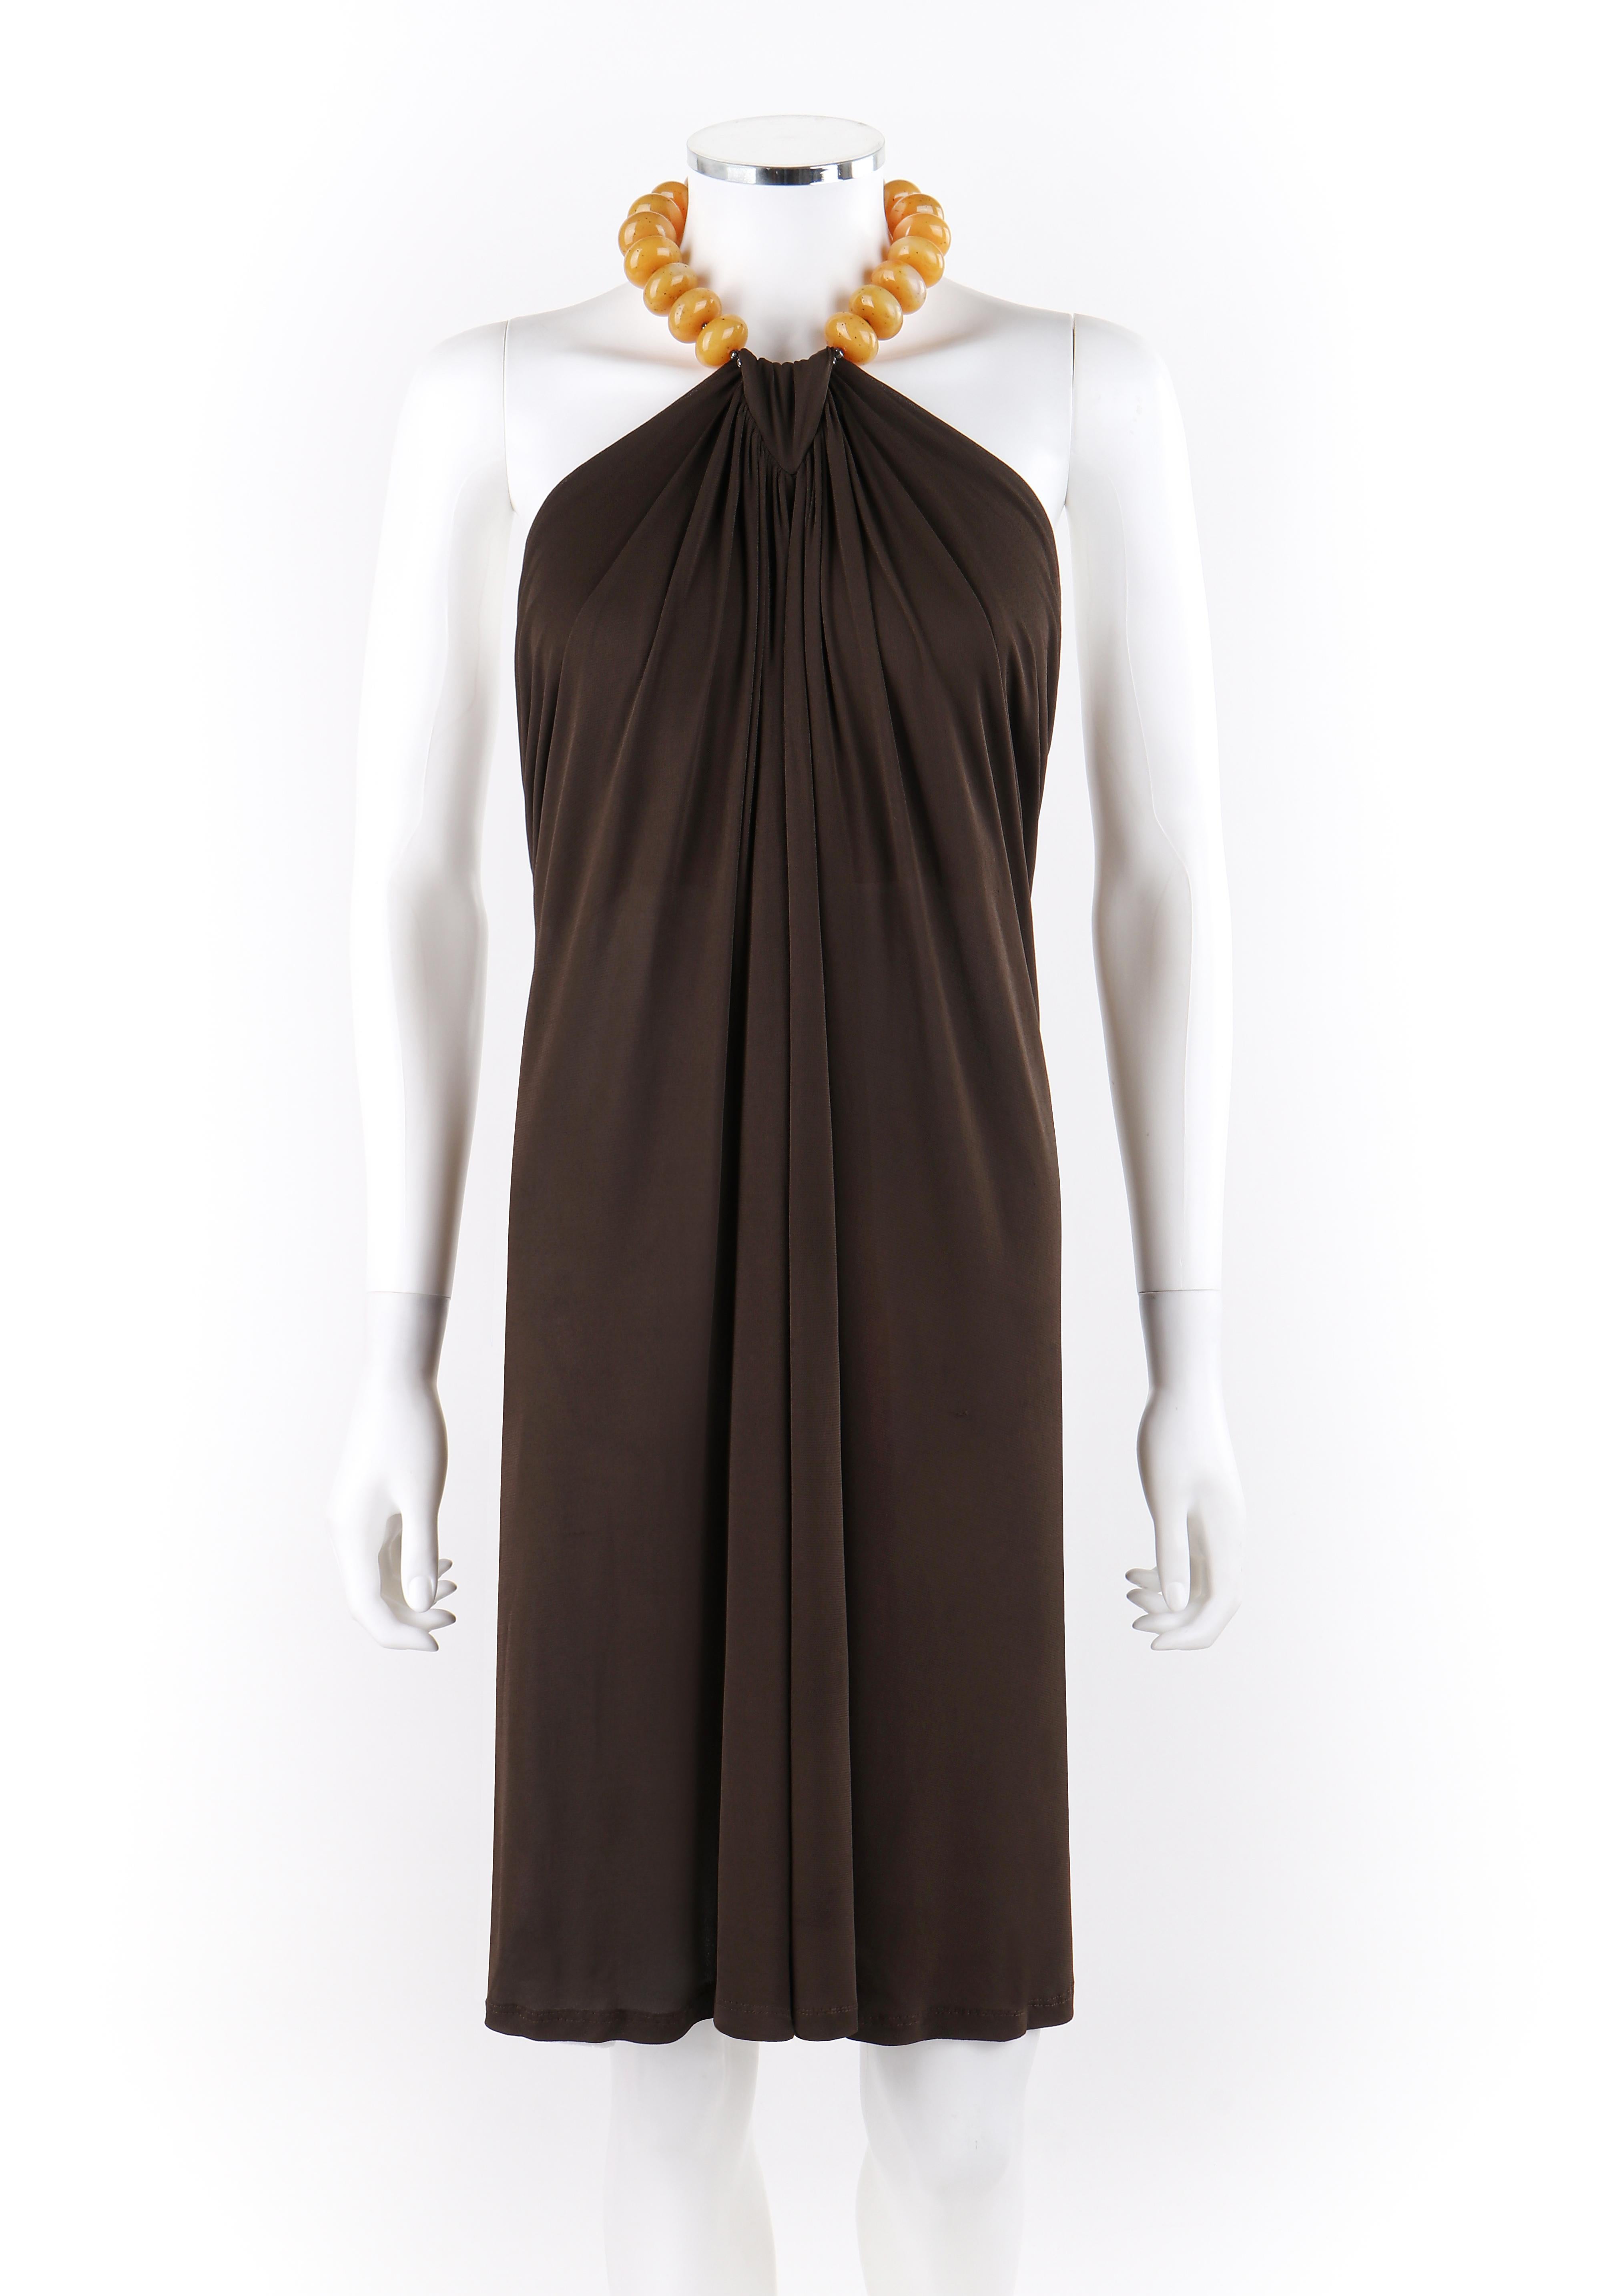 ALEXANDER McQUEEN F/W 2006 Brown Halter Dress Amber Stone Bead Choker Necklace
 
Brand / Manufacturer: Alexander McQueen
Collection: c.2006 
Designer: Alexander McQueen
Style: Halter dress
Color(s): Brown; necklace: shades of tan, yellow
Lined: